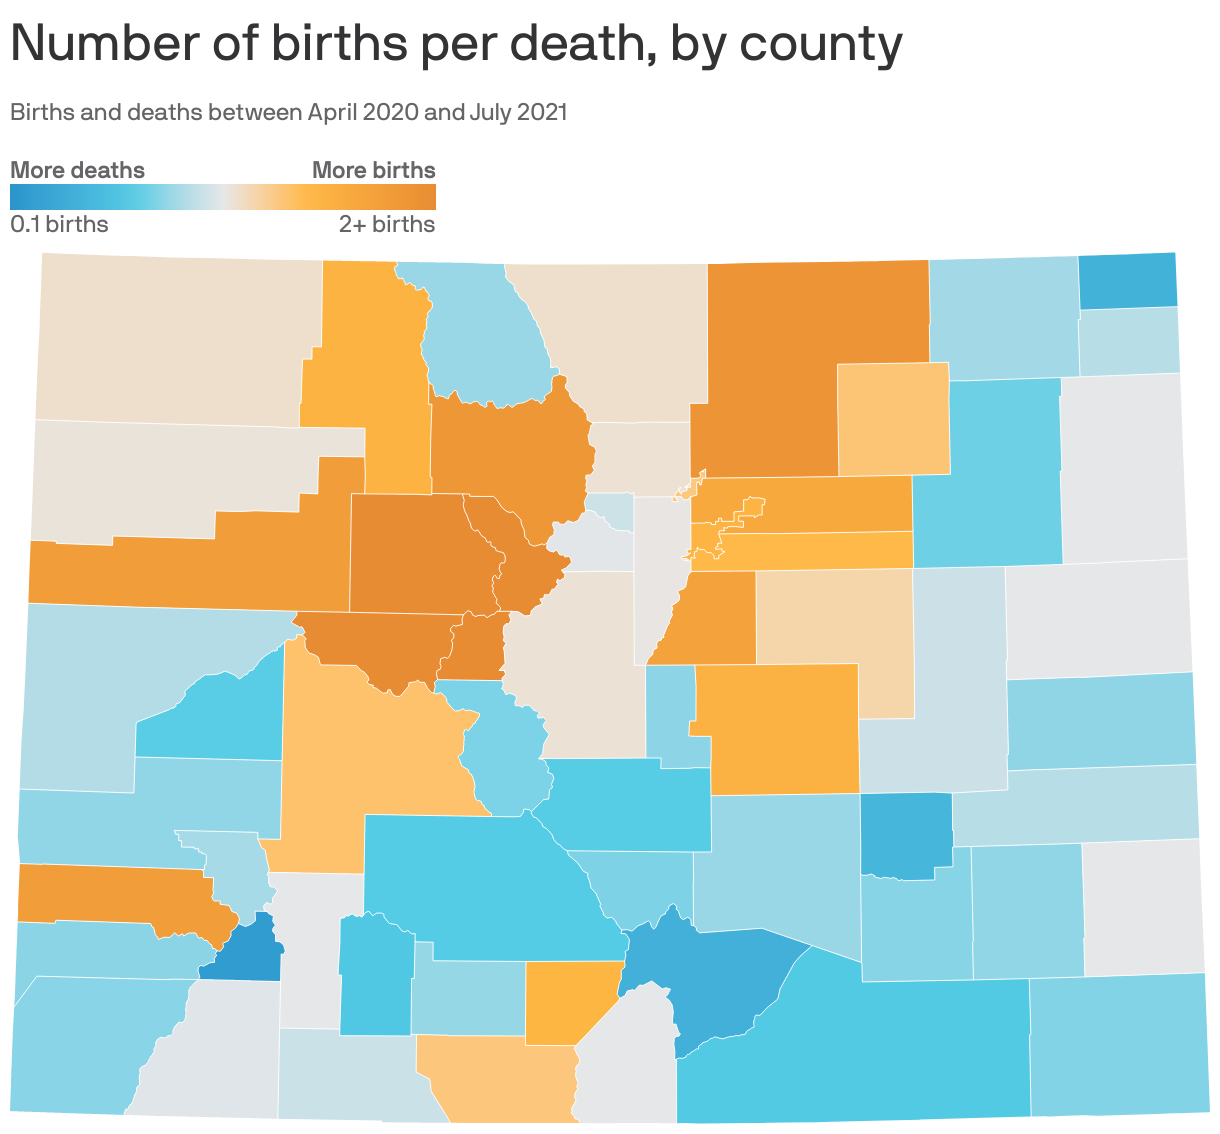 Number of births per death, by county